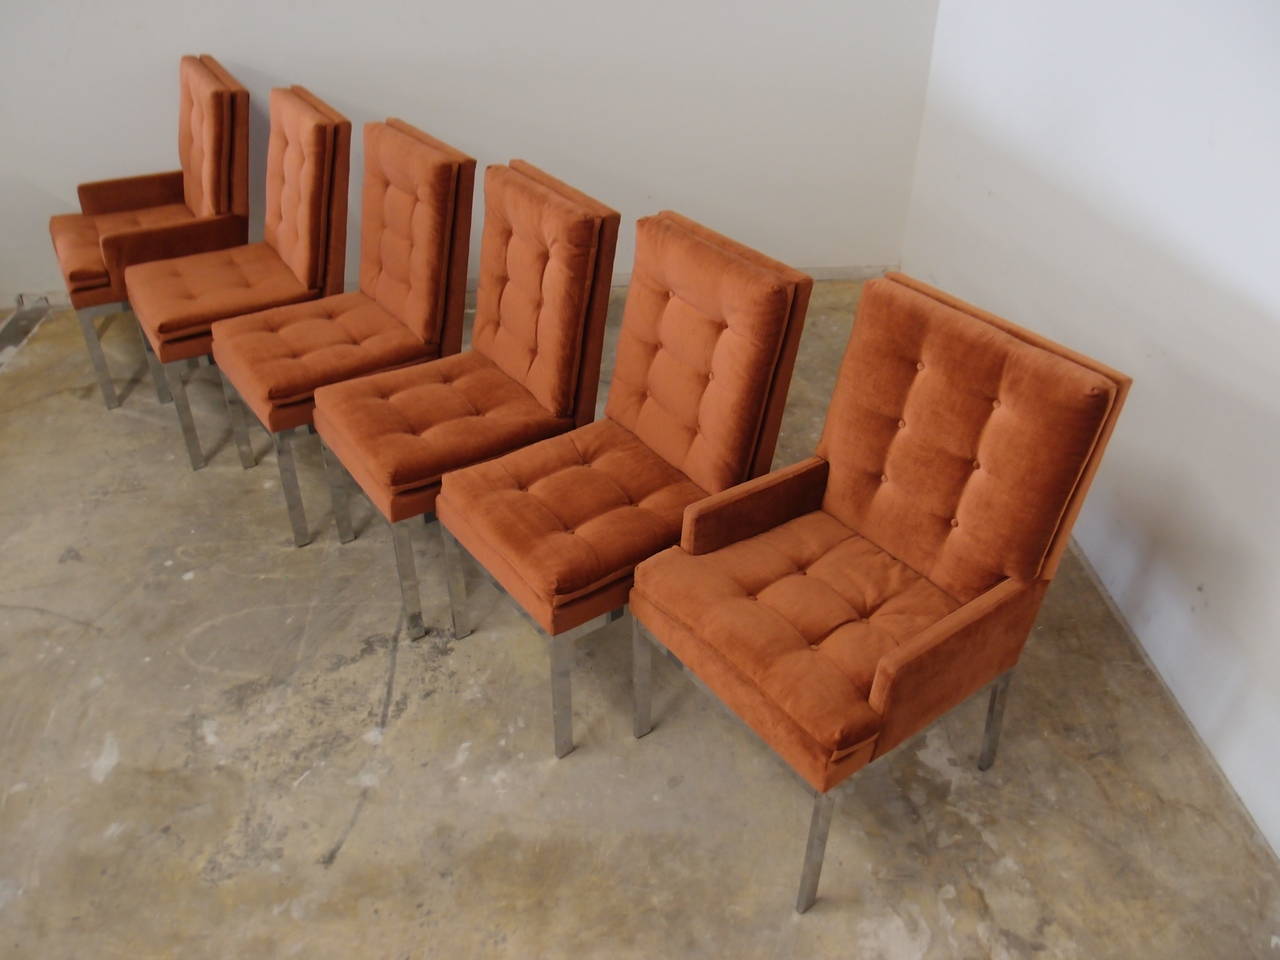 These set of six dining chairs manufactured by the Design Institute of American and attributed to Milo Baughman are comprised of two captain's chairs with arms and four chairs without arms. The original burnt orange color upholstery is serviceable